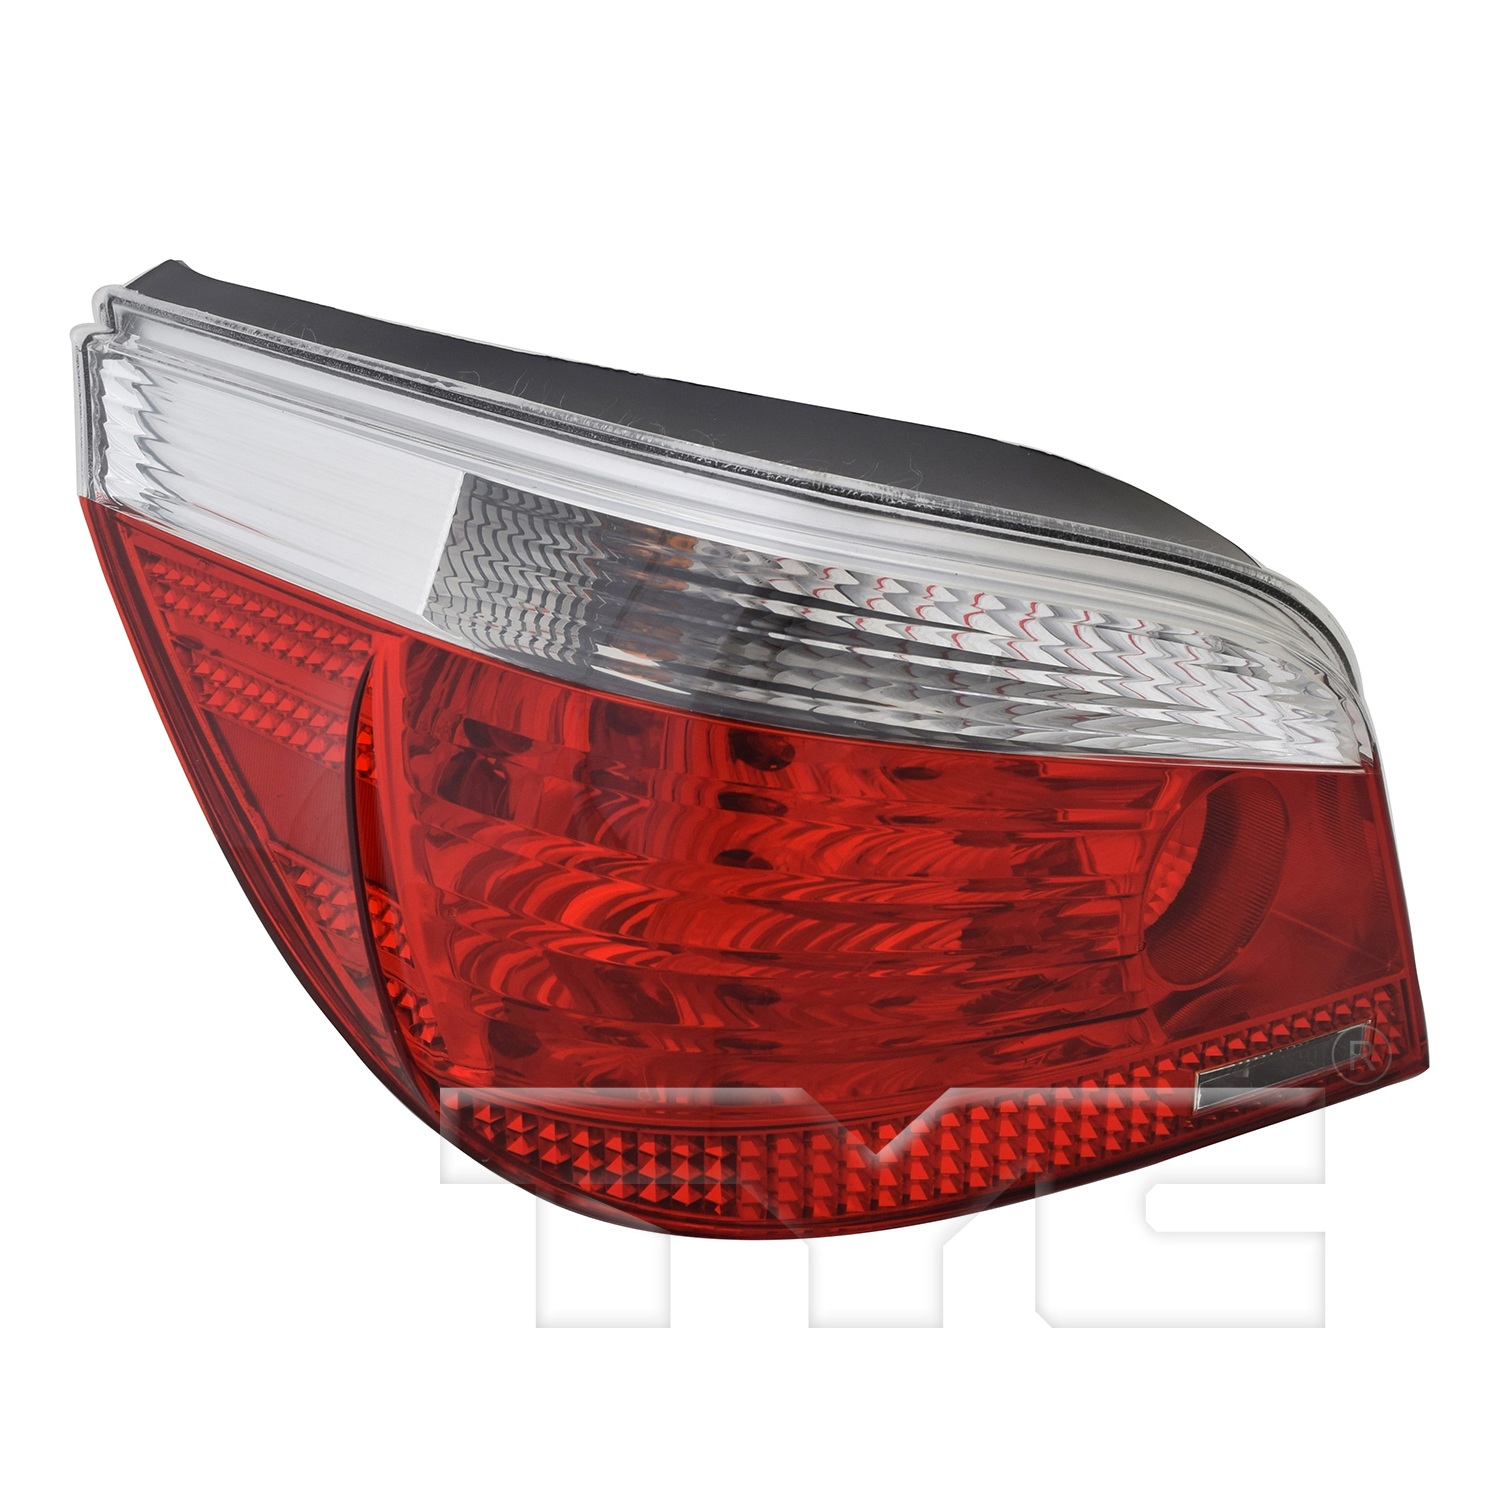 Aftermarket TAILLIGHTS for BMW - 550I, 550i,06-08,LT Taillamp assy